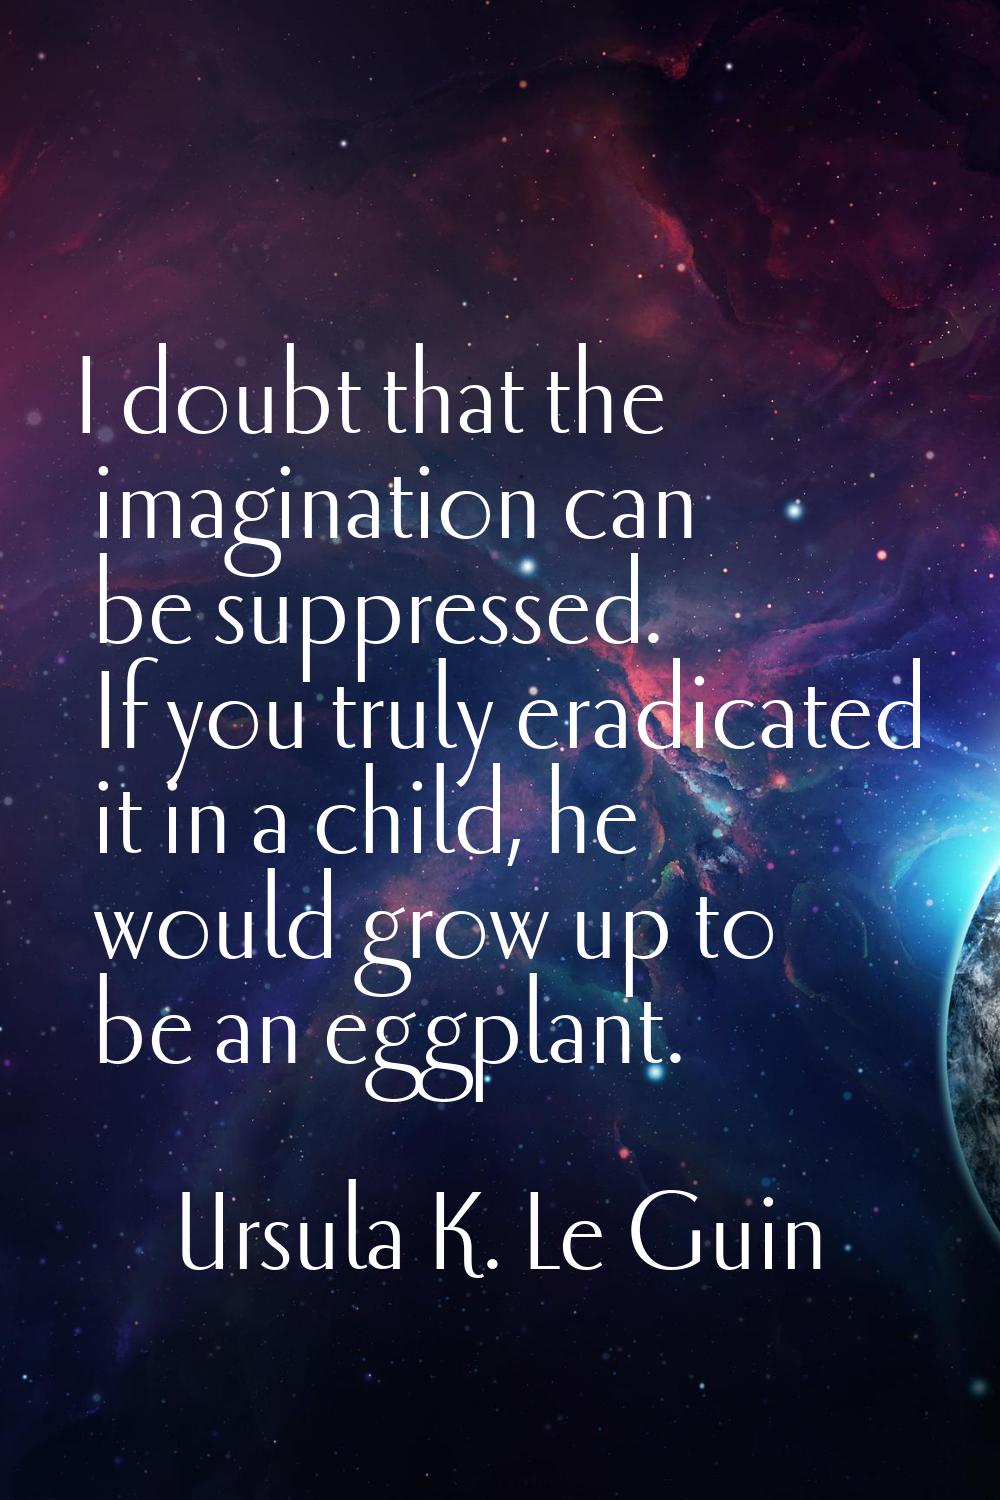 I doubt that the imagination can be suppressed. If you truly eradicated it in a child, he would gro